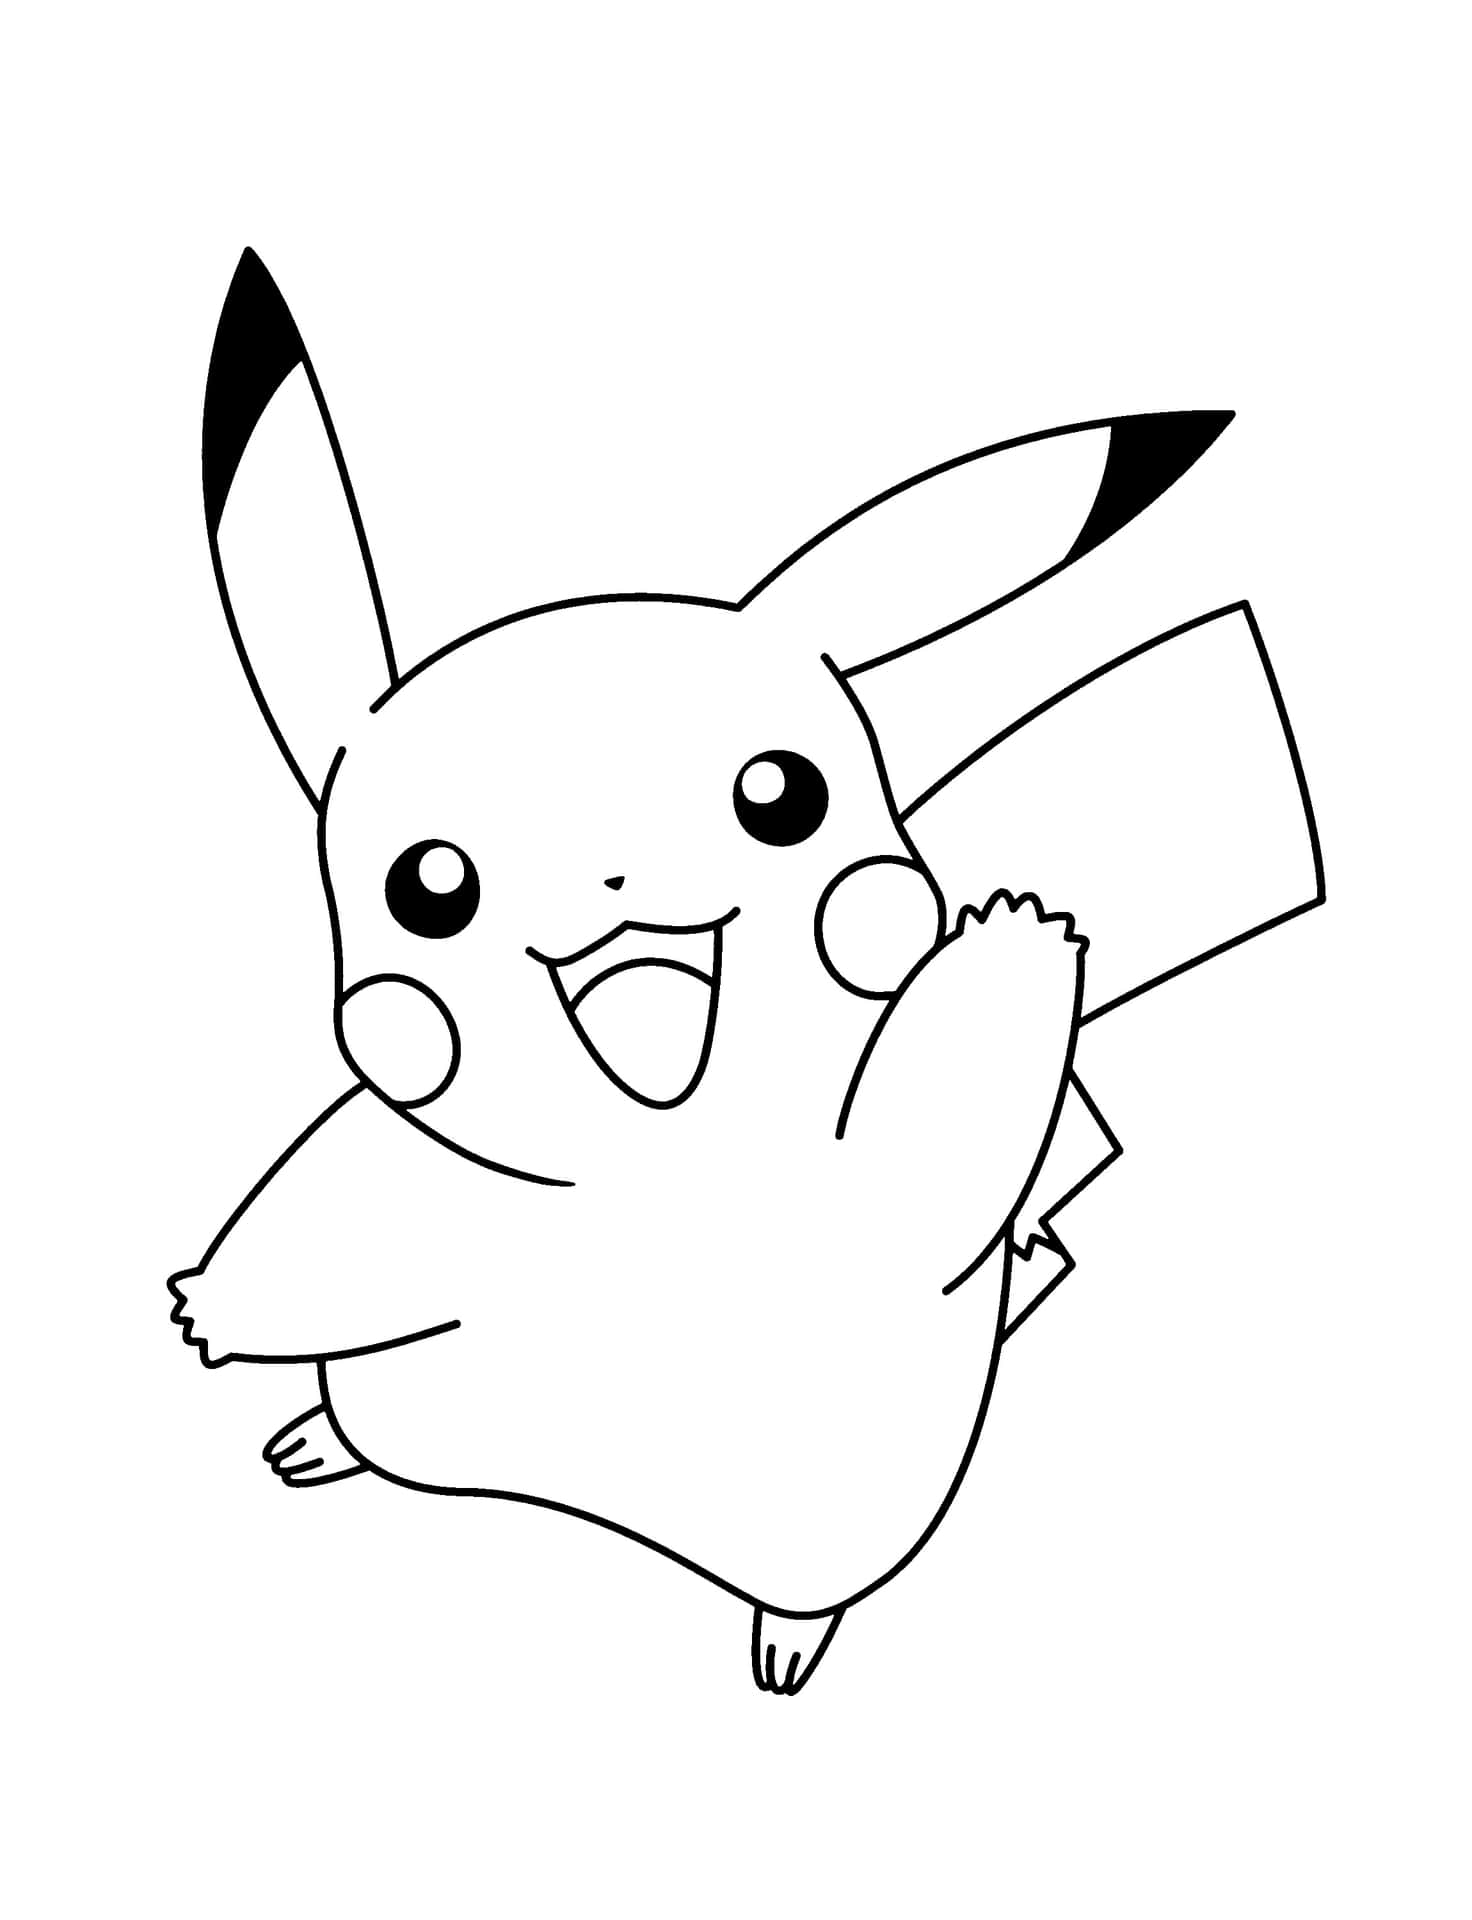 pokemon coloring pages pikachu and ash - Google Search  Pokemon coloring  pages, Pokemon coloring, Cartoon coloring pages